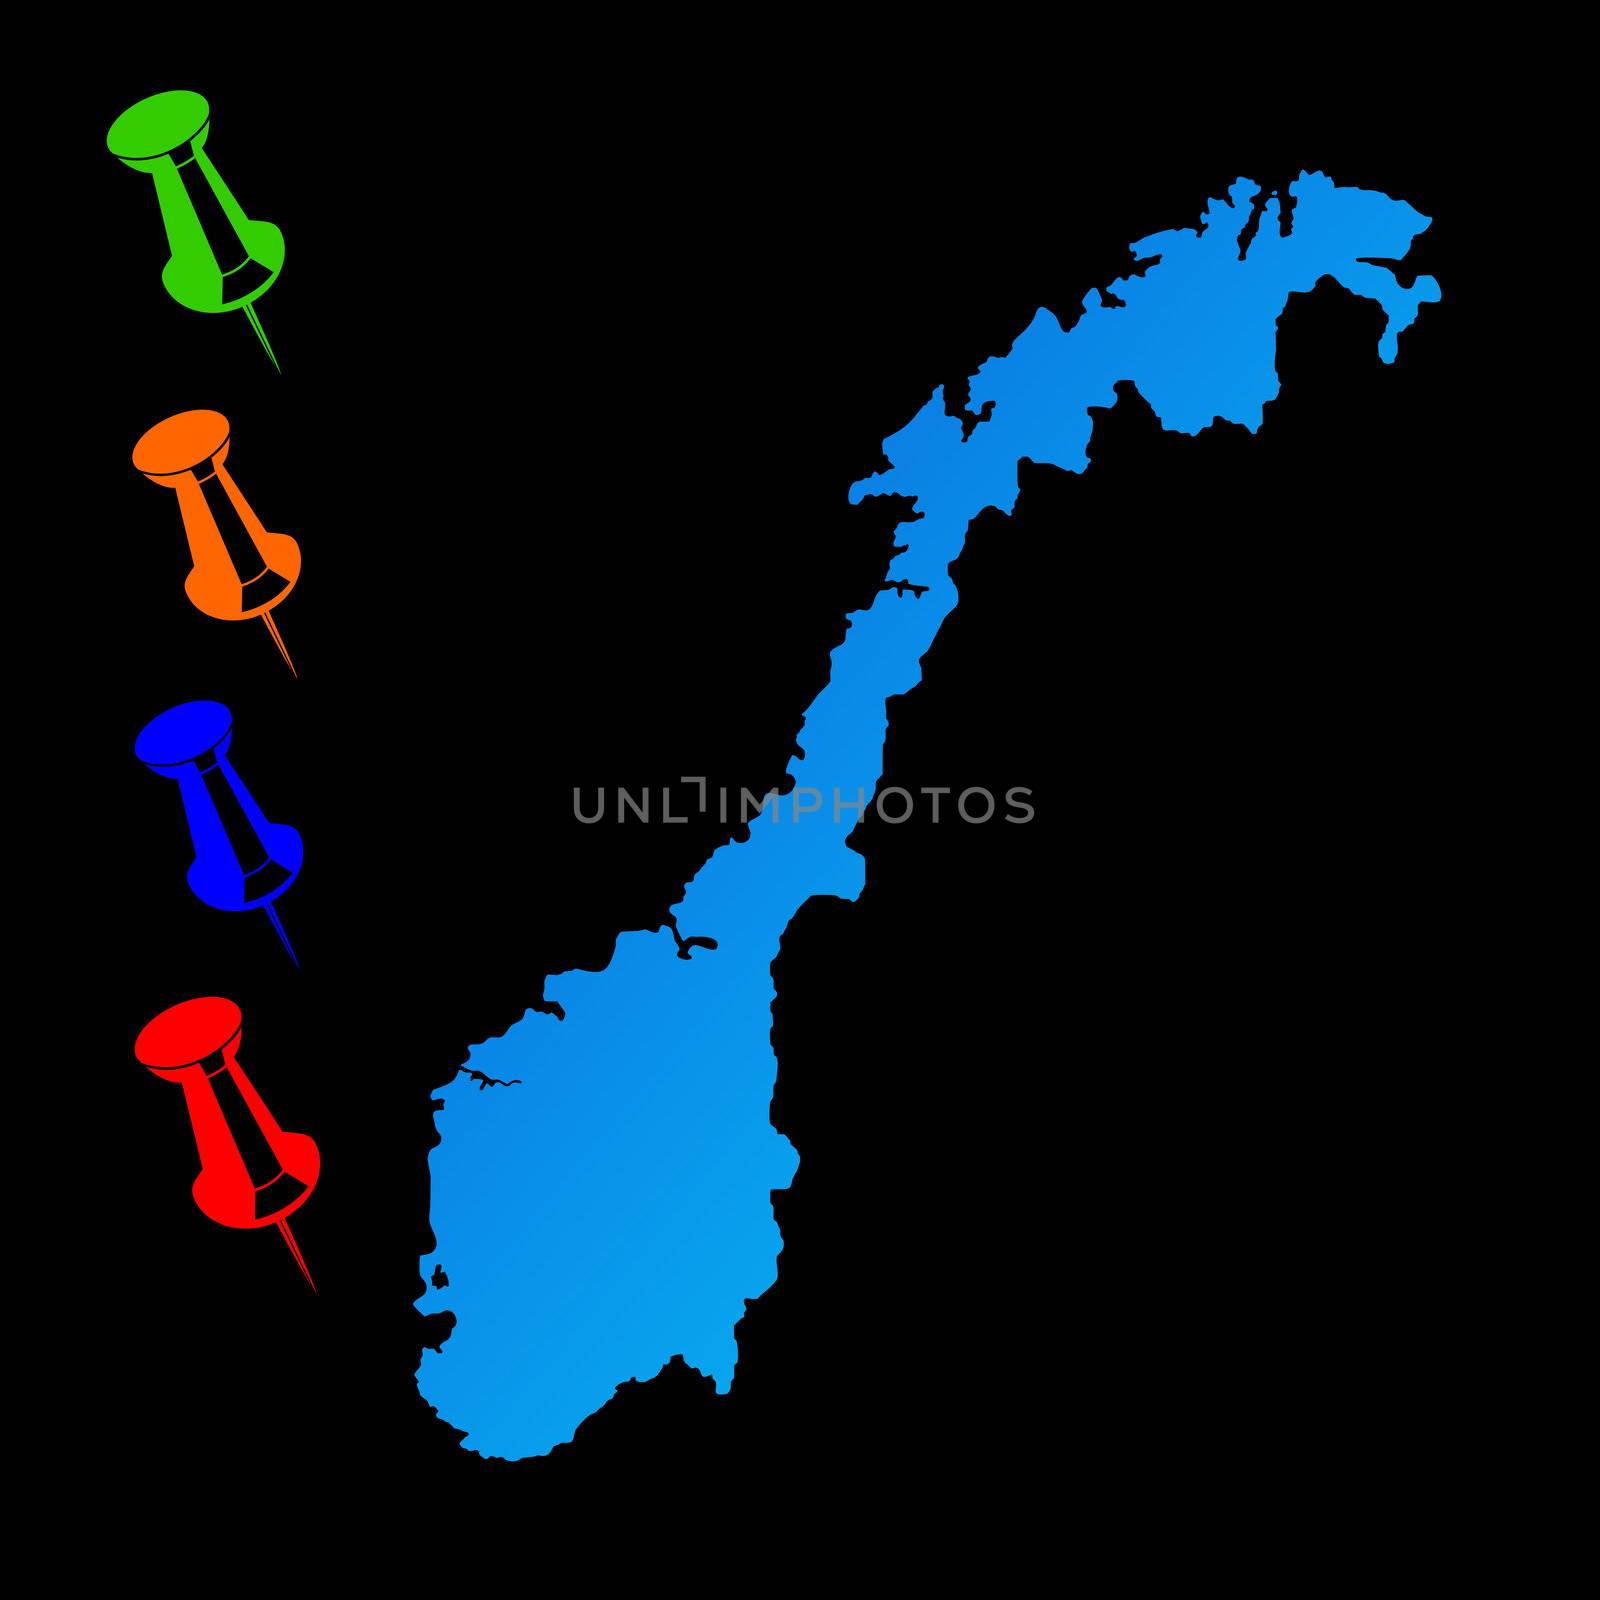 Norway travel map with push pins on black background.